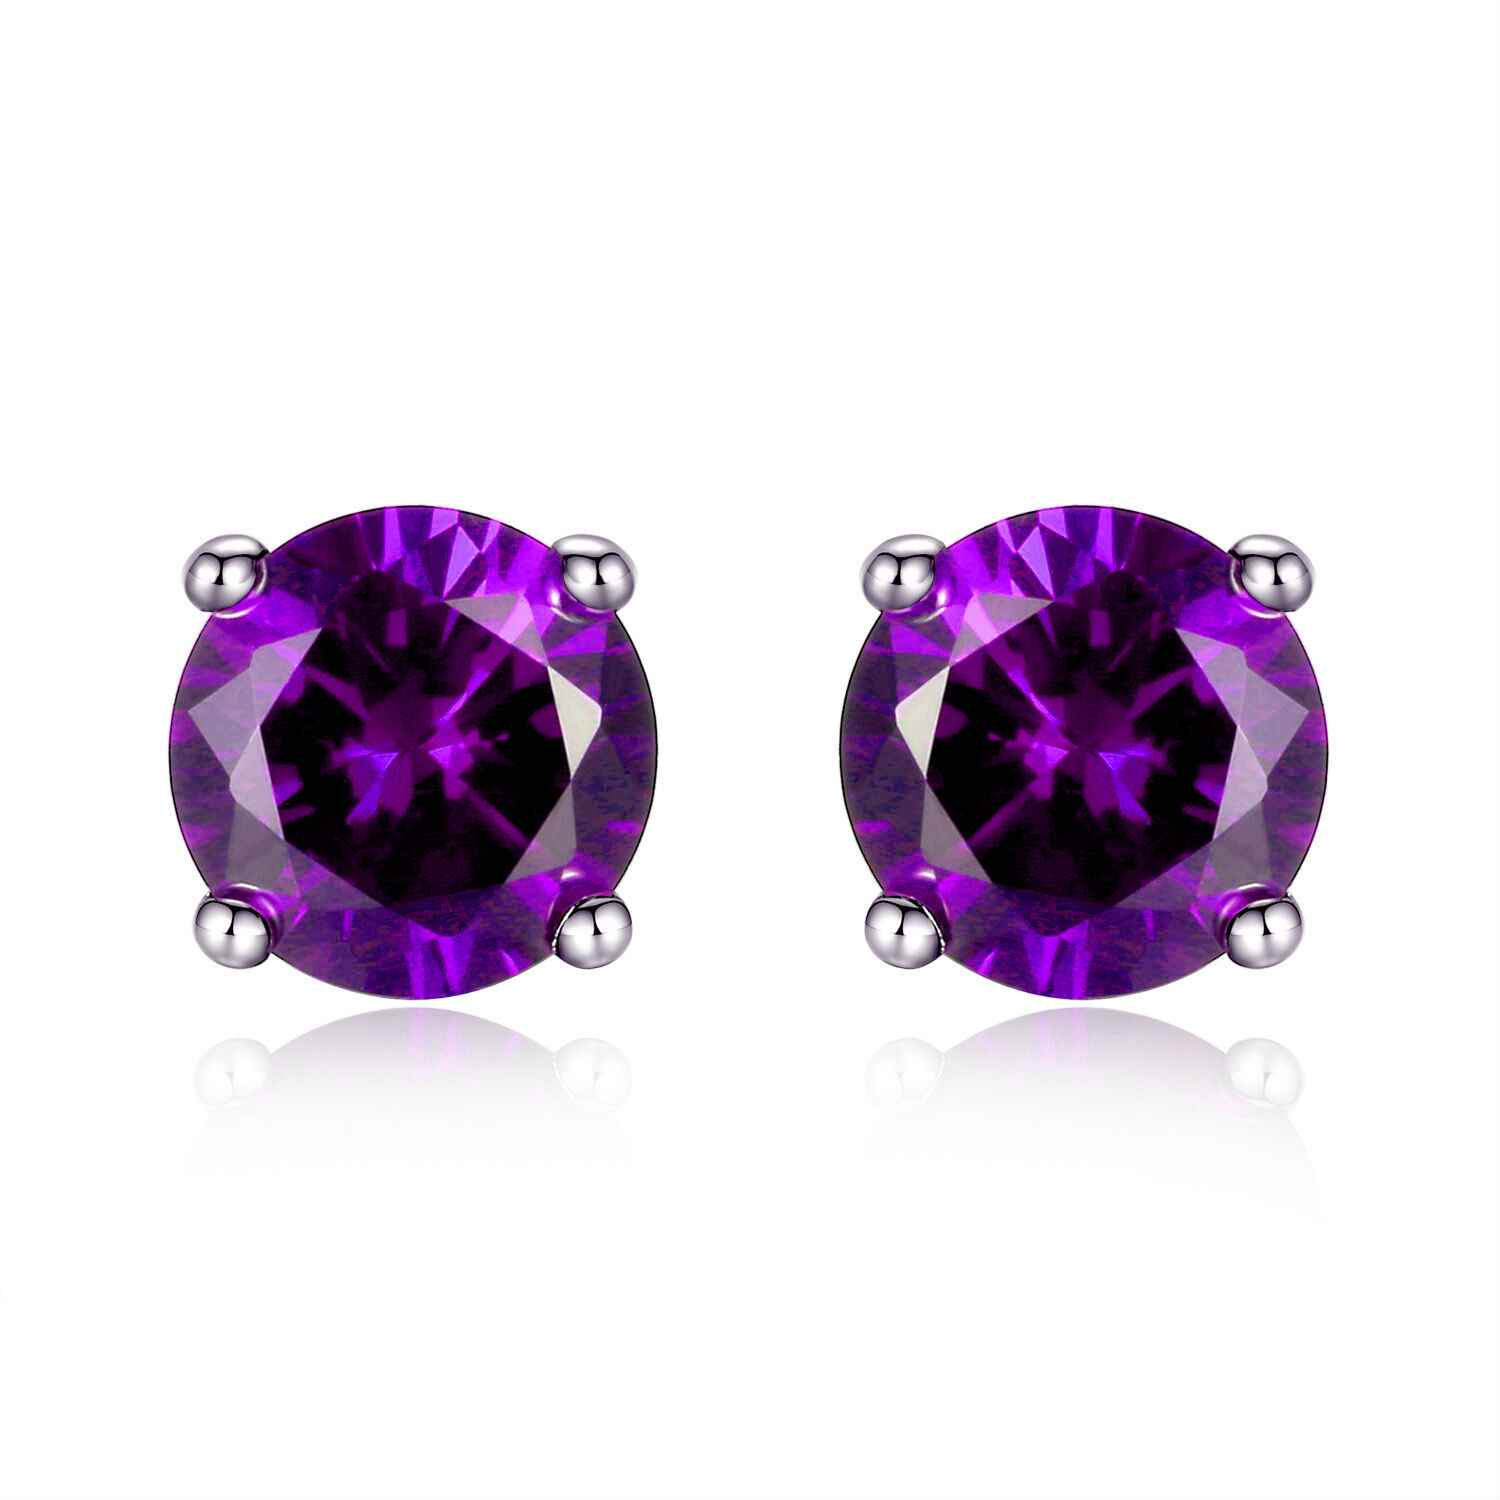 Lab Created Amethyst 6mm Round Cut 925 Sterling Silver Stud Earrings Gifts For Women